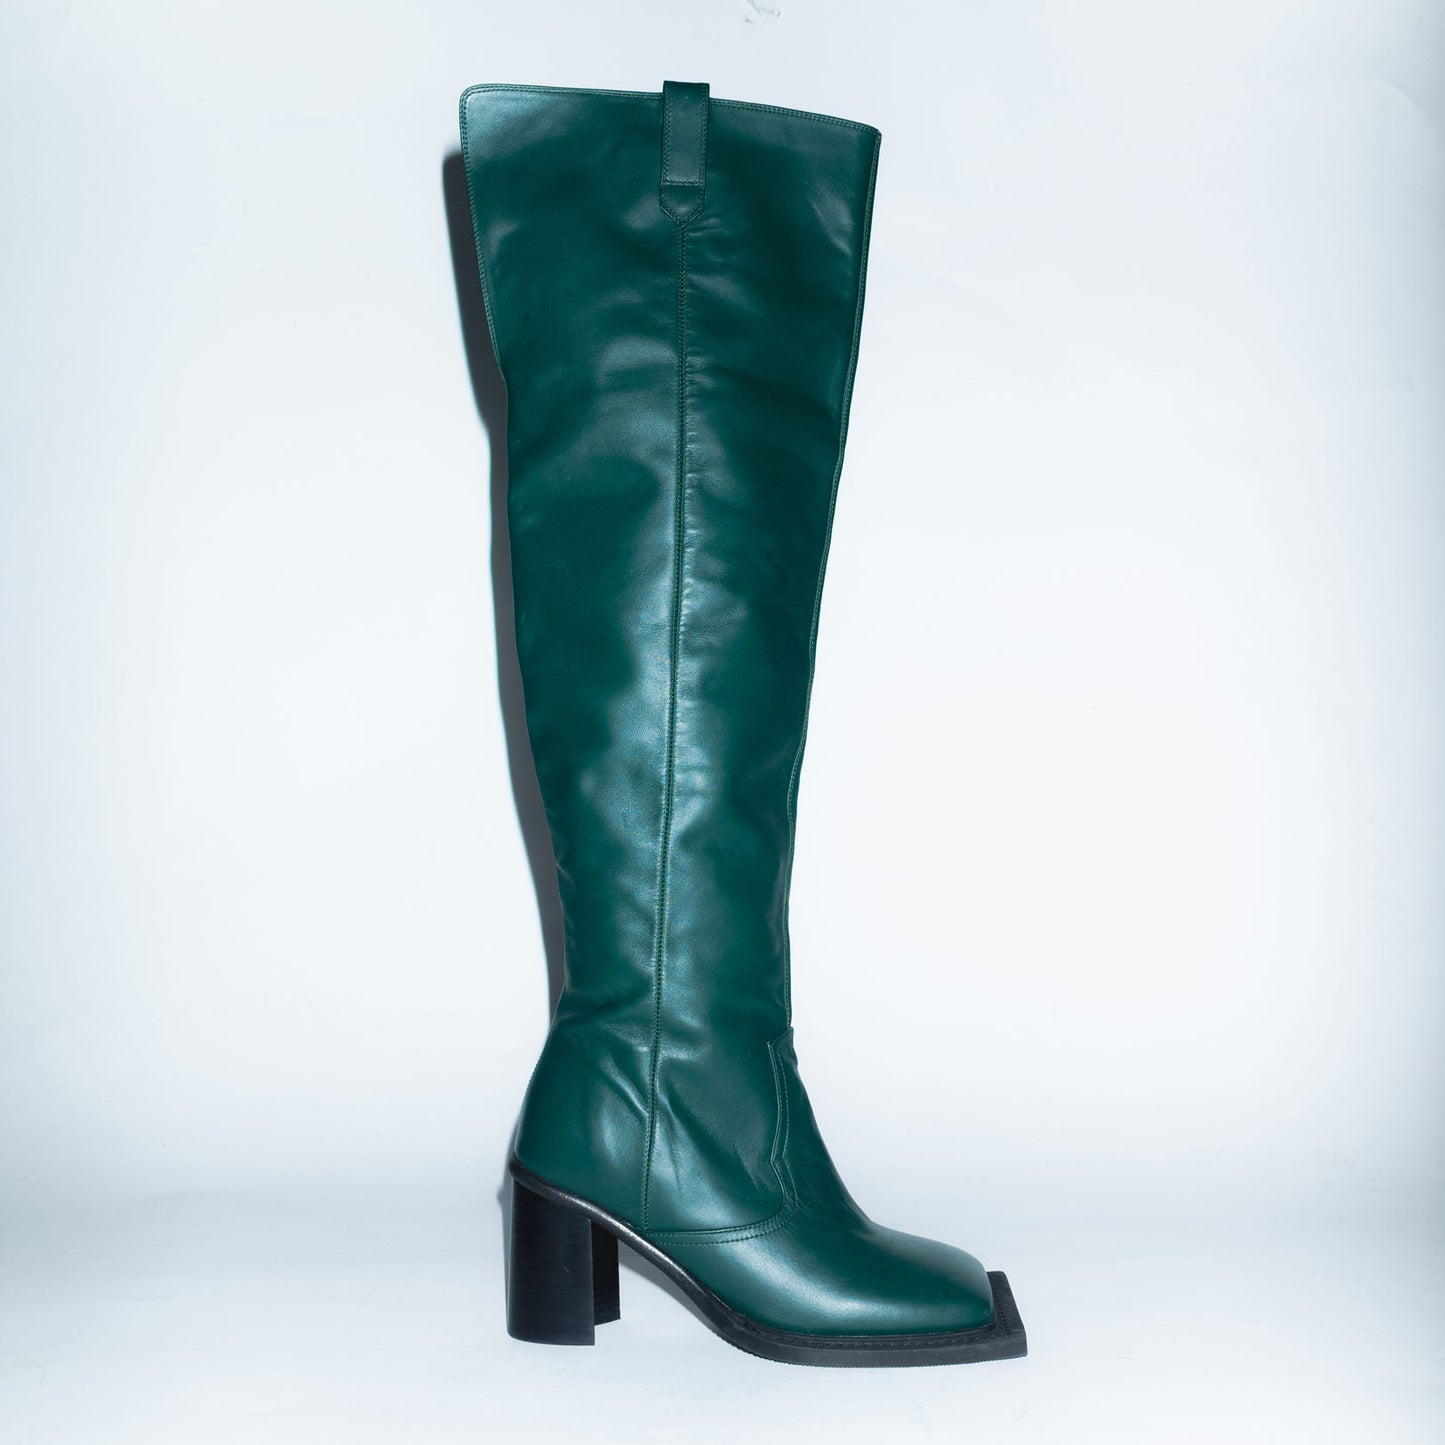 Archive Howling Knee High Boots in Dark Green Leather